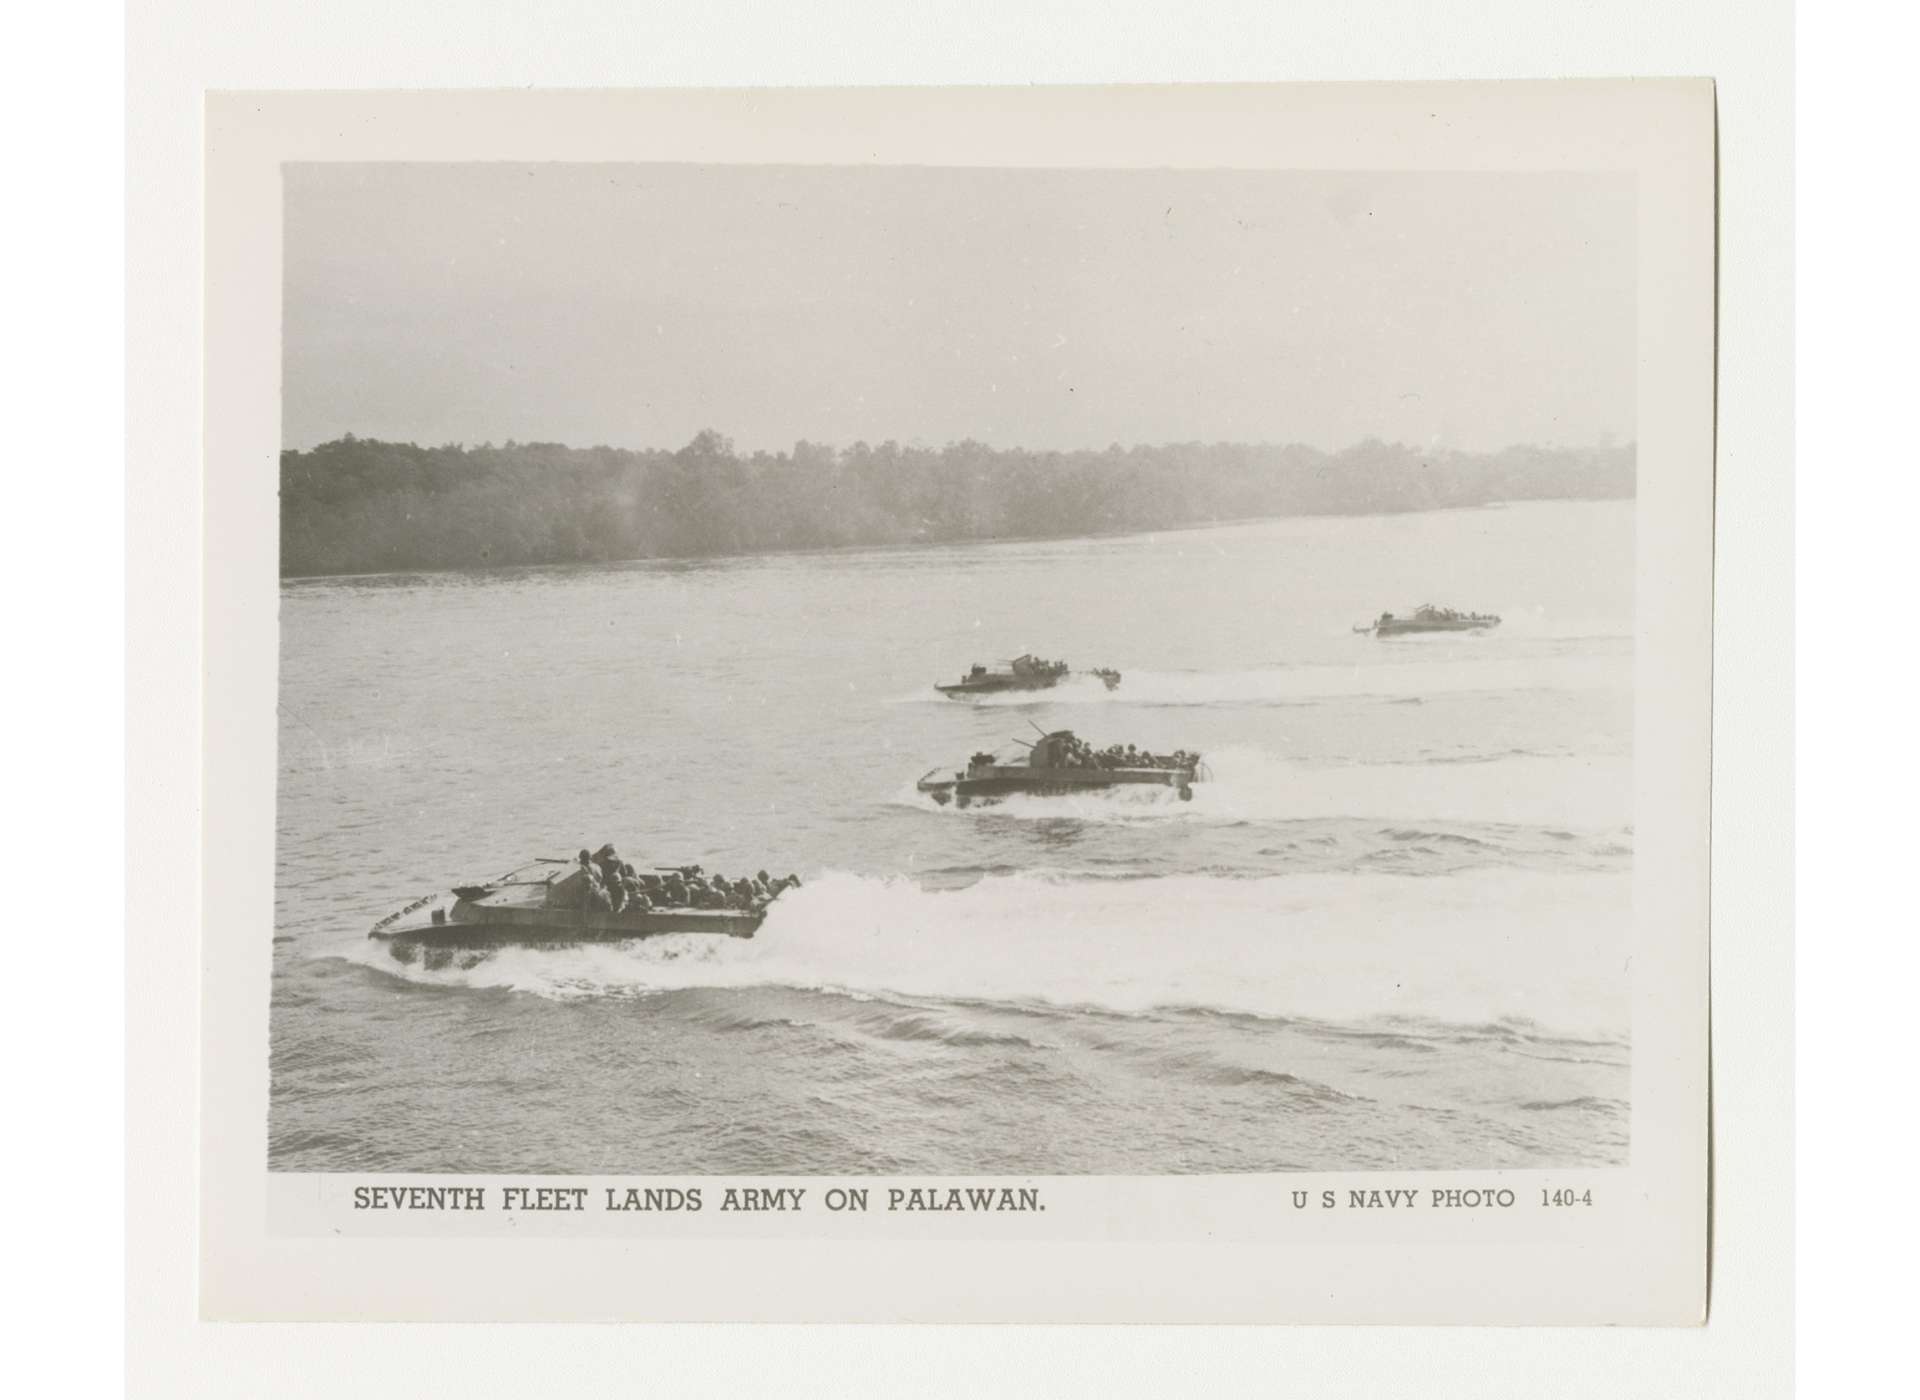 On February 28, 1945, the US 41st Infantry Division conducted an assault landing at Palawan in US Navy LVTs (Landing Vehicles, Tracked). On the same date, the Palawan Special Battalion, instrumental in the safeguarding the POWs who survived the massacre on Palawan, came under the operational control of the division. US Navy Photo 140-4, Gift of Lyle E. Eberspecher, from the Collection of The National World War II Museum, 2013.495.902.